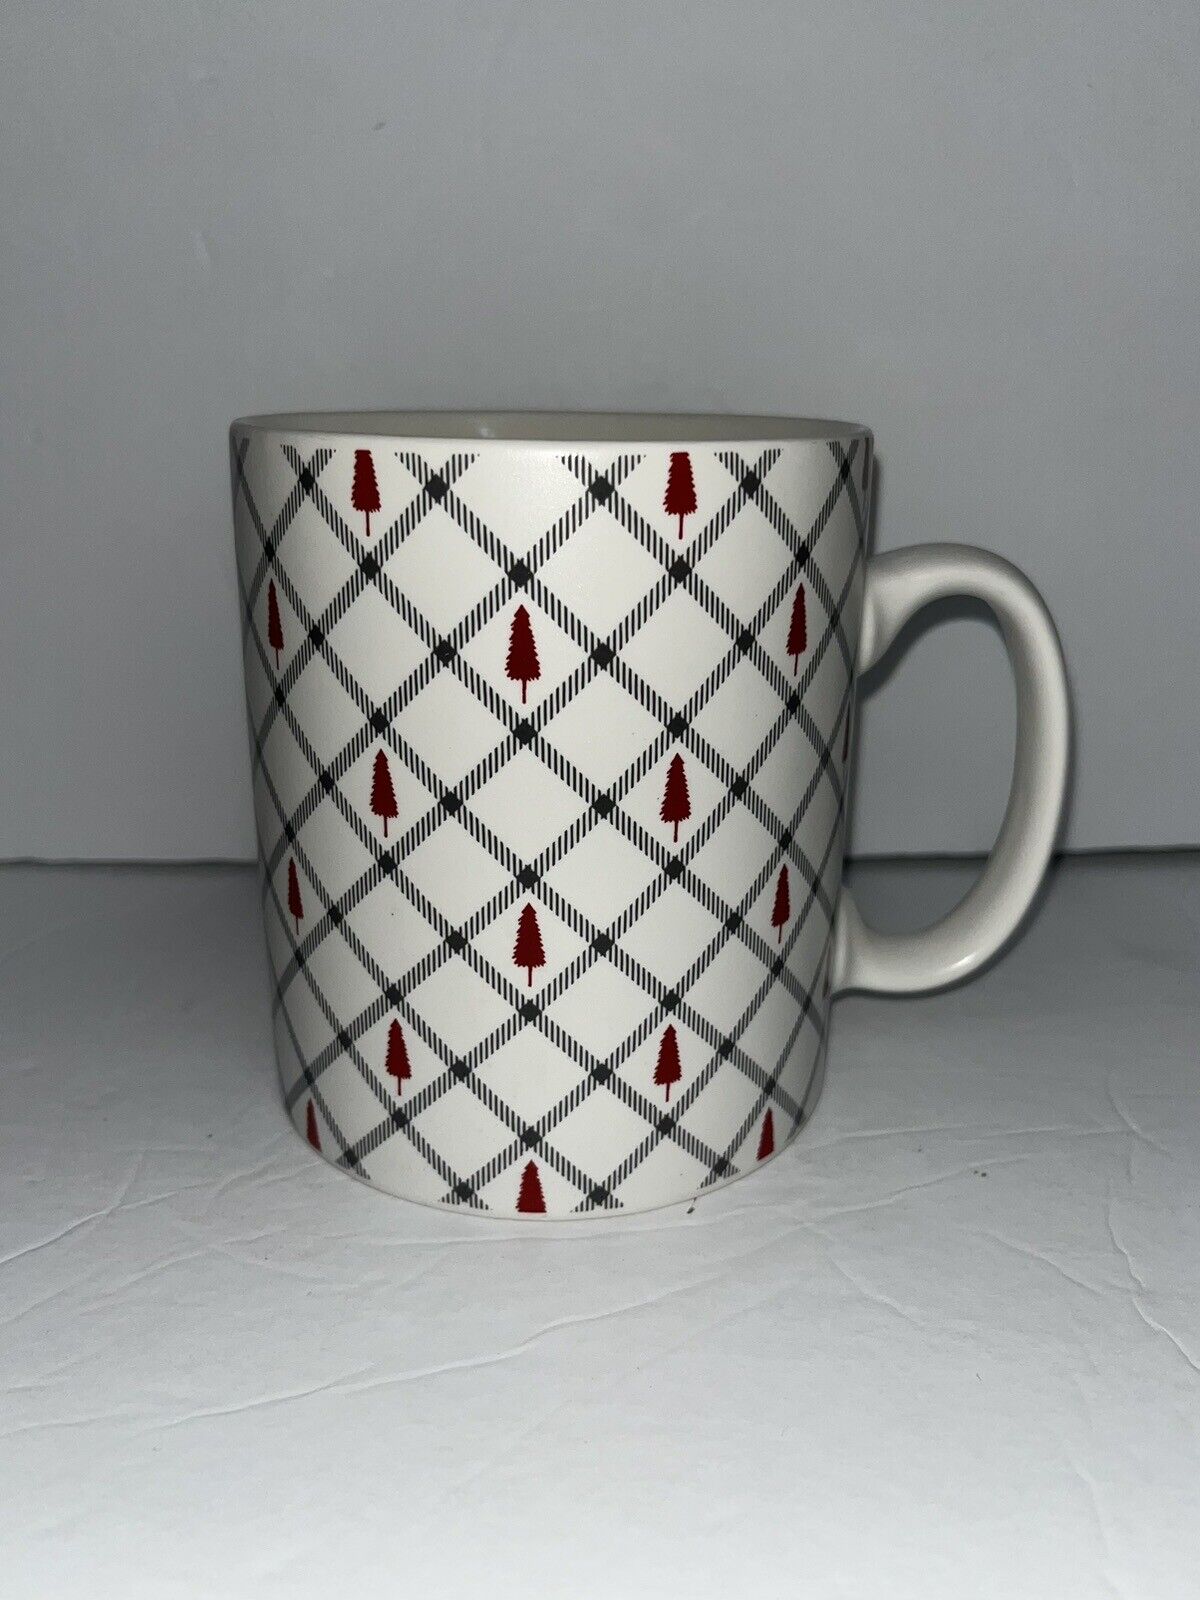 Christmas Trees Designpac Oversized Coffee Cup Mug Red White and Gray